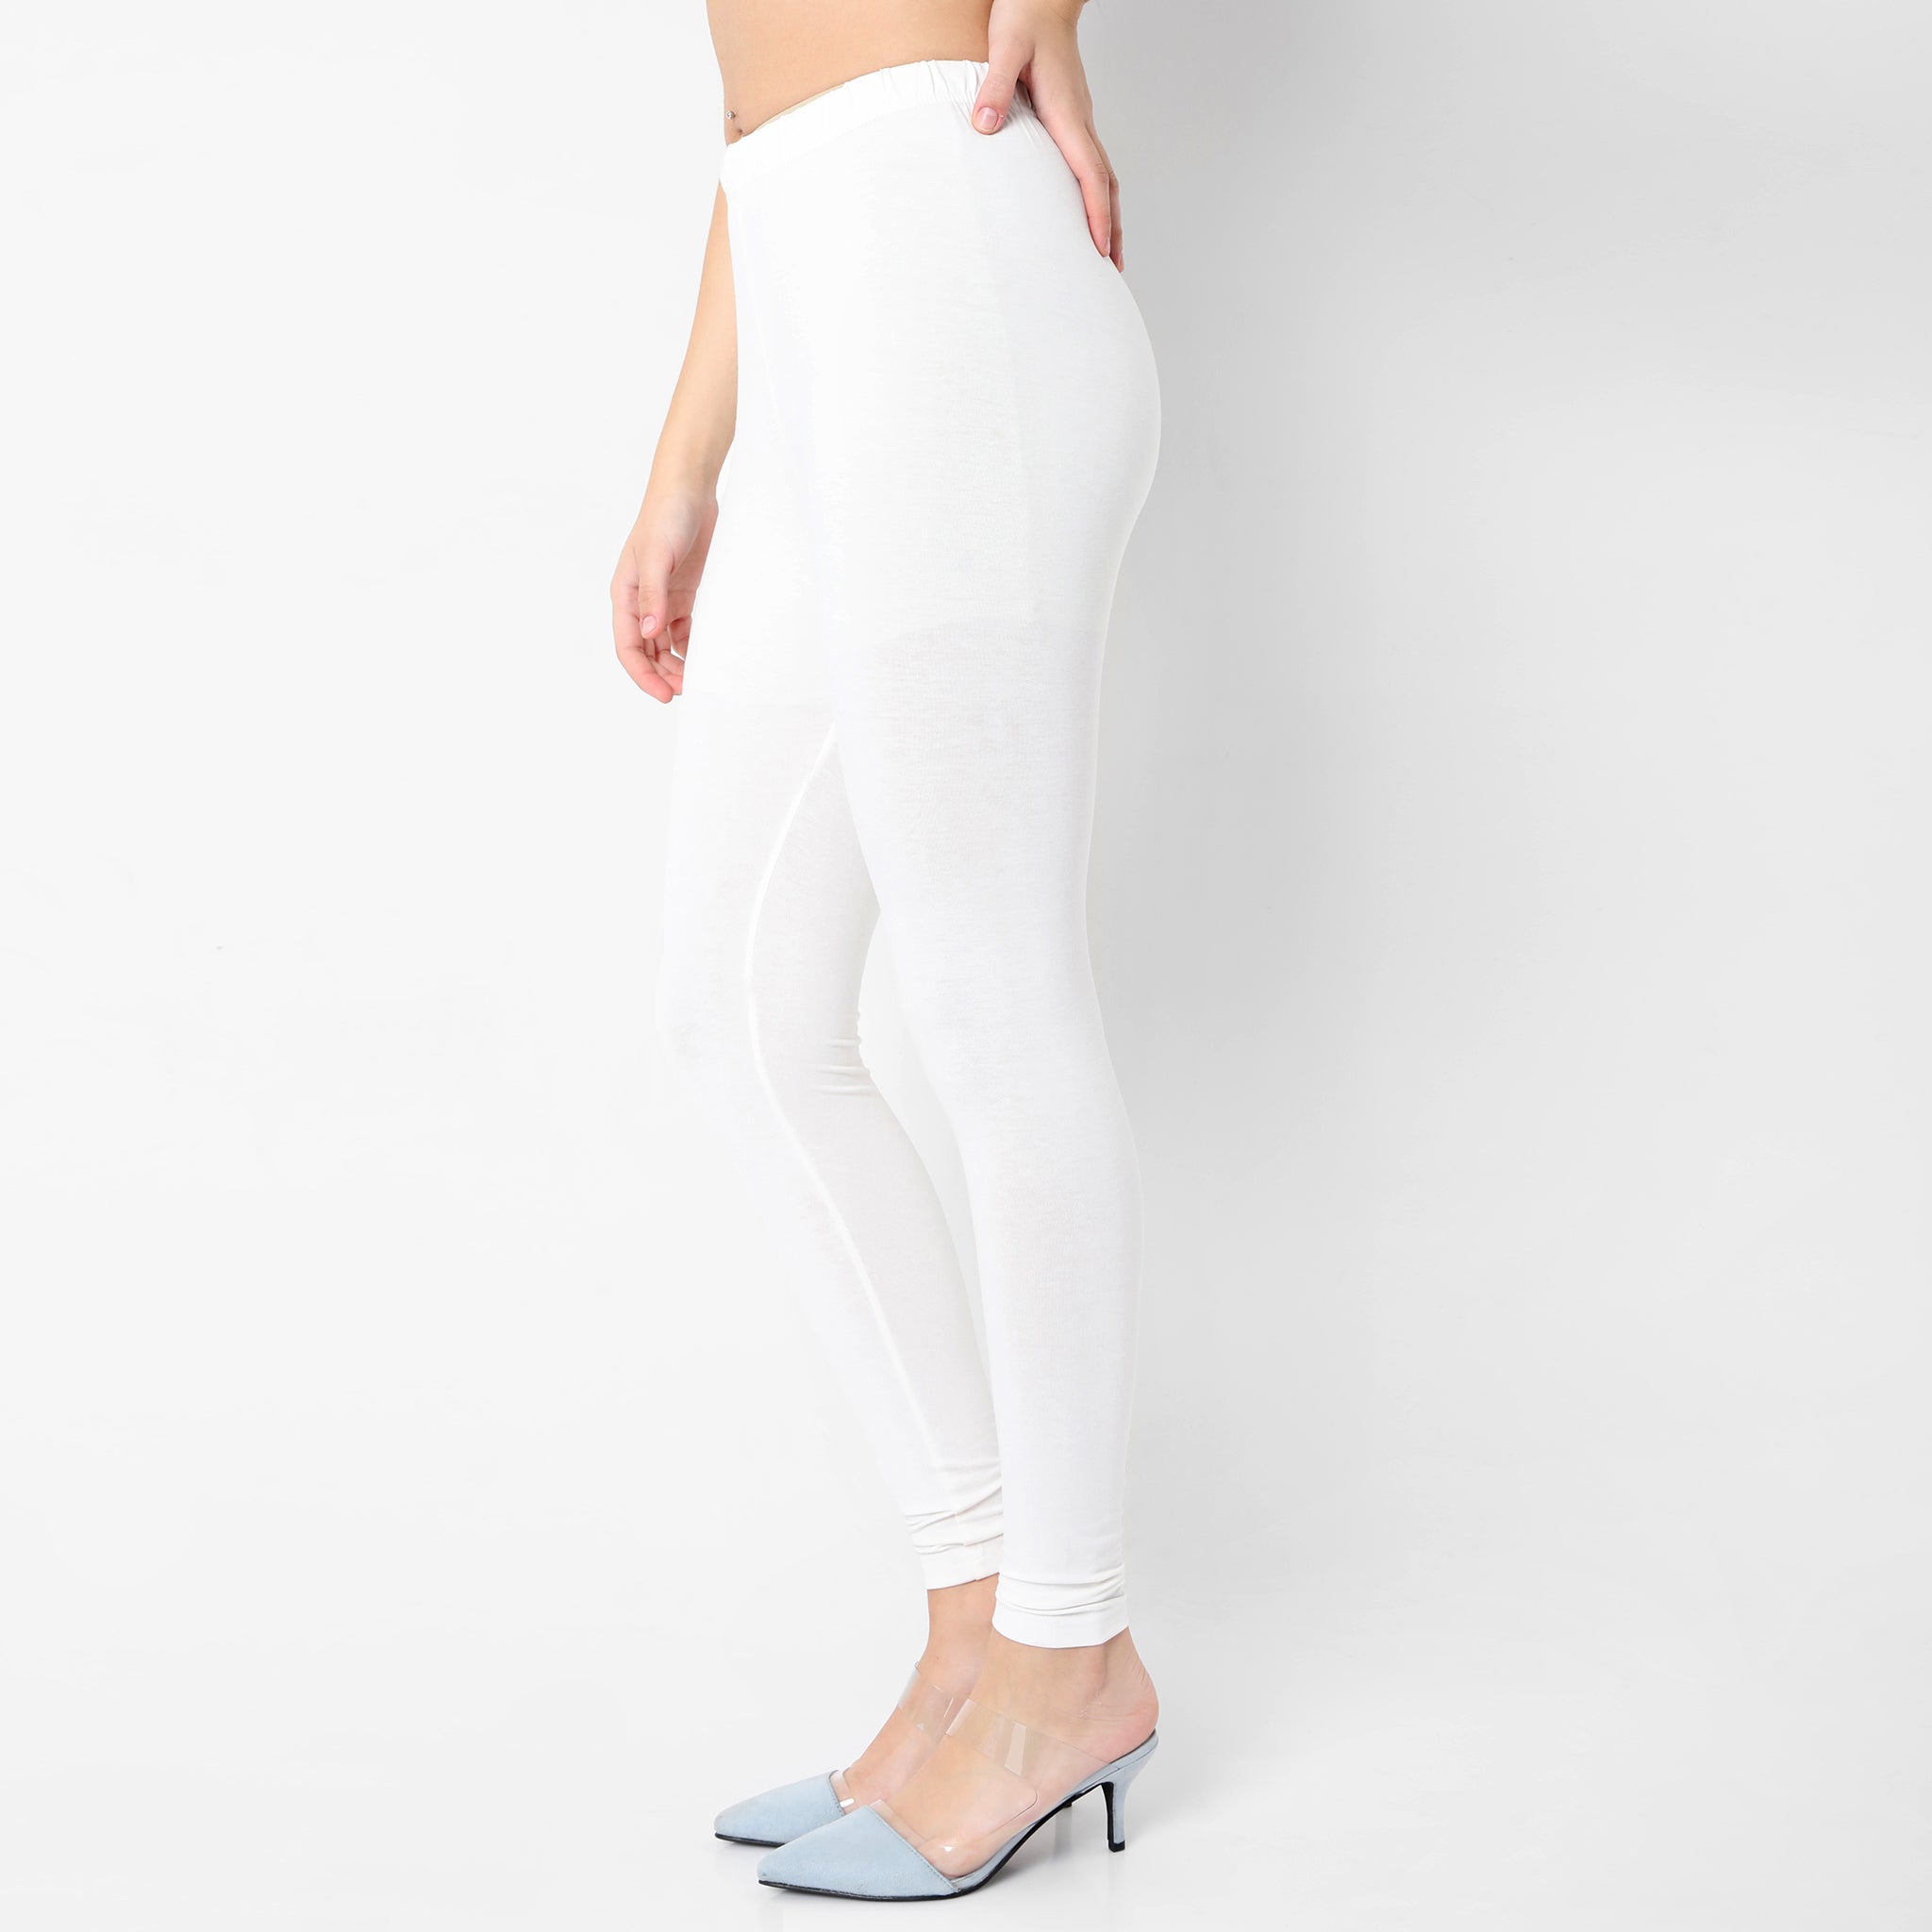 Ankle Smart Fit RFD White Dyeable Legging 100%, Size: XL and XXL 3XL, Skin  Fit at Rs 250 in Delhi